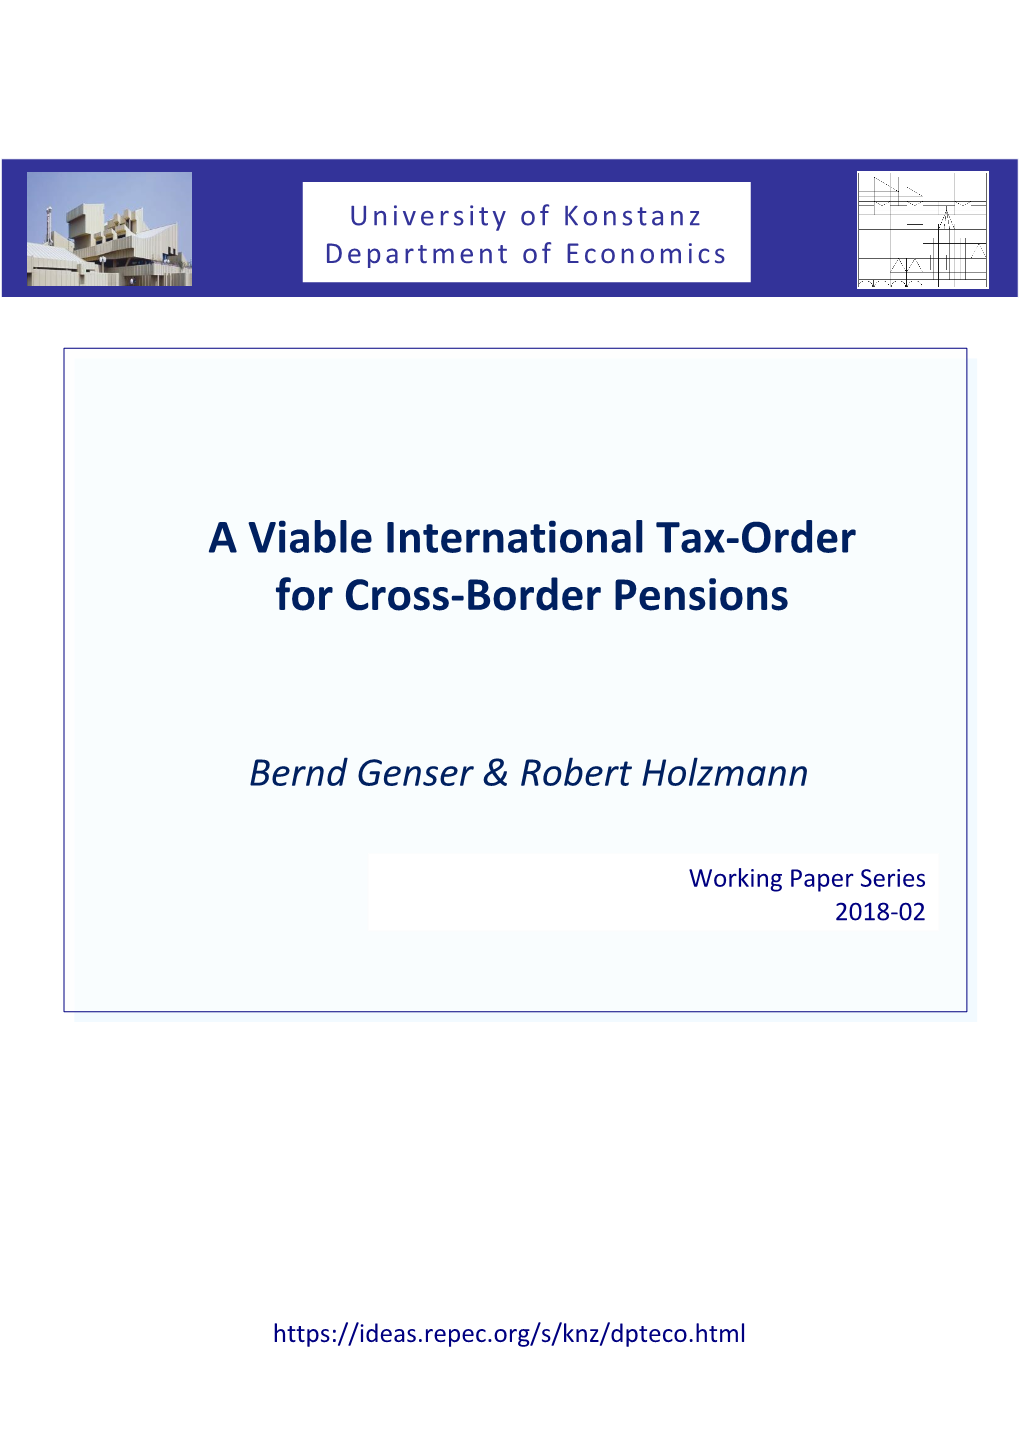 A Viable International Tax-Order for Cross-Border Pensions